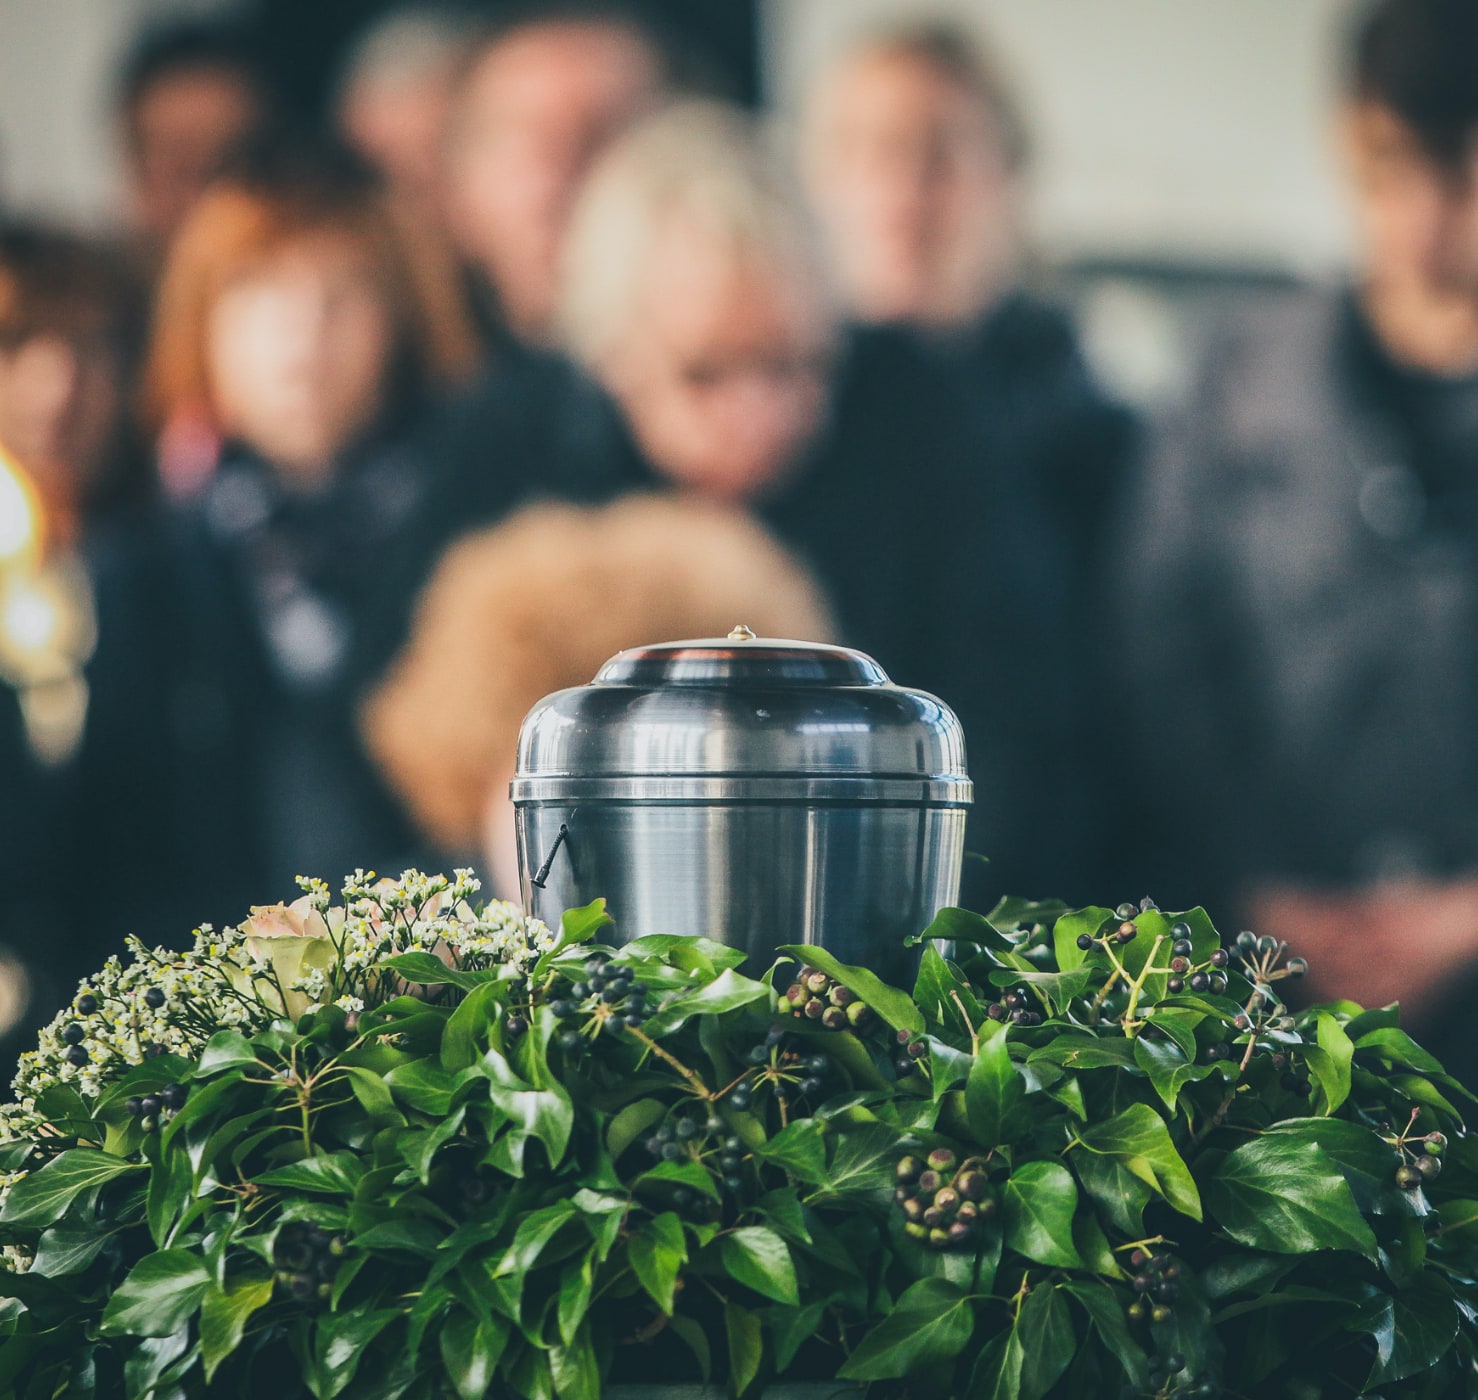 Our service is offered with care, support and guidance with all aspects of arranging a funeral. We have a 24 hour personal service and offer prepaid funeral plans.